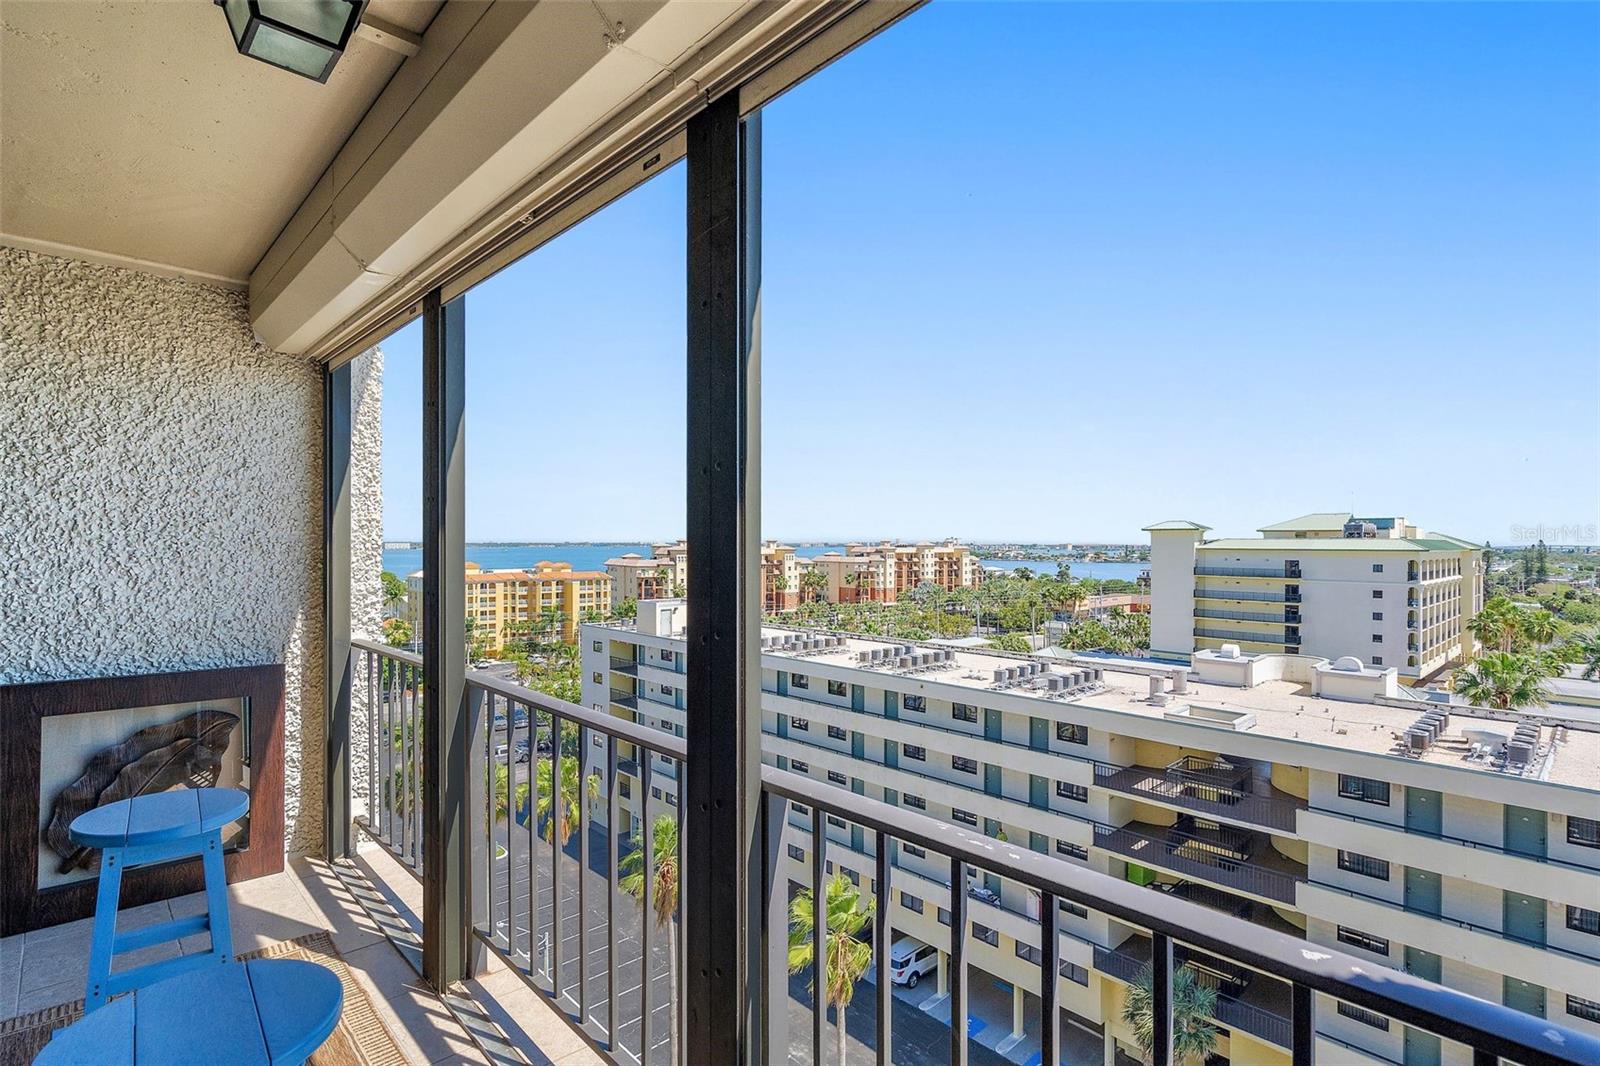 It has views of Boca Ciega Bay, as well as the beach and Gulf!